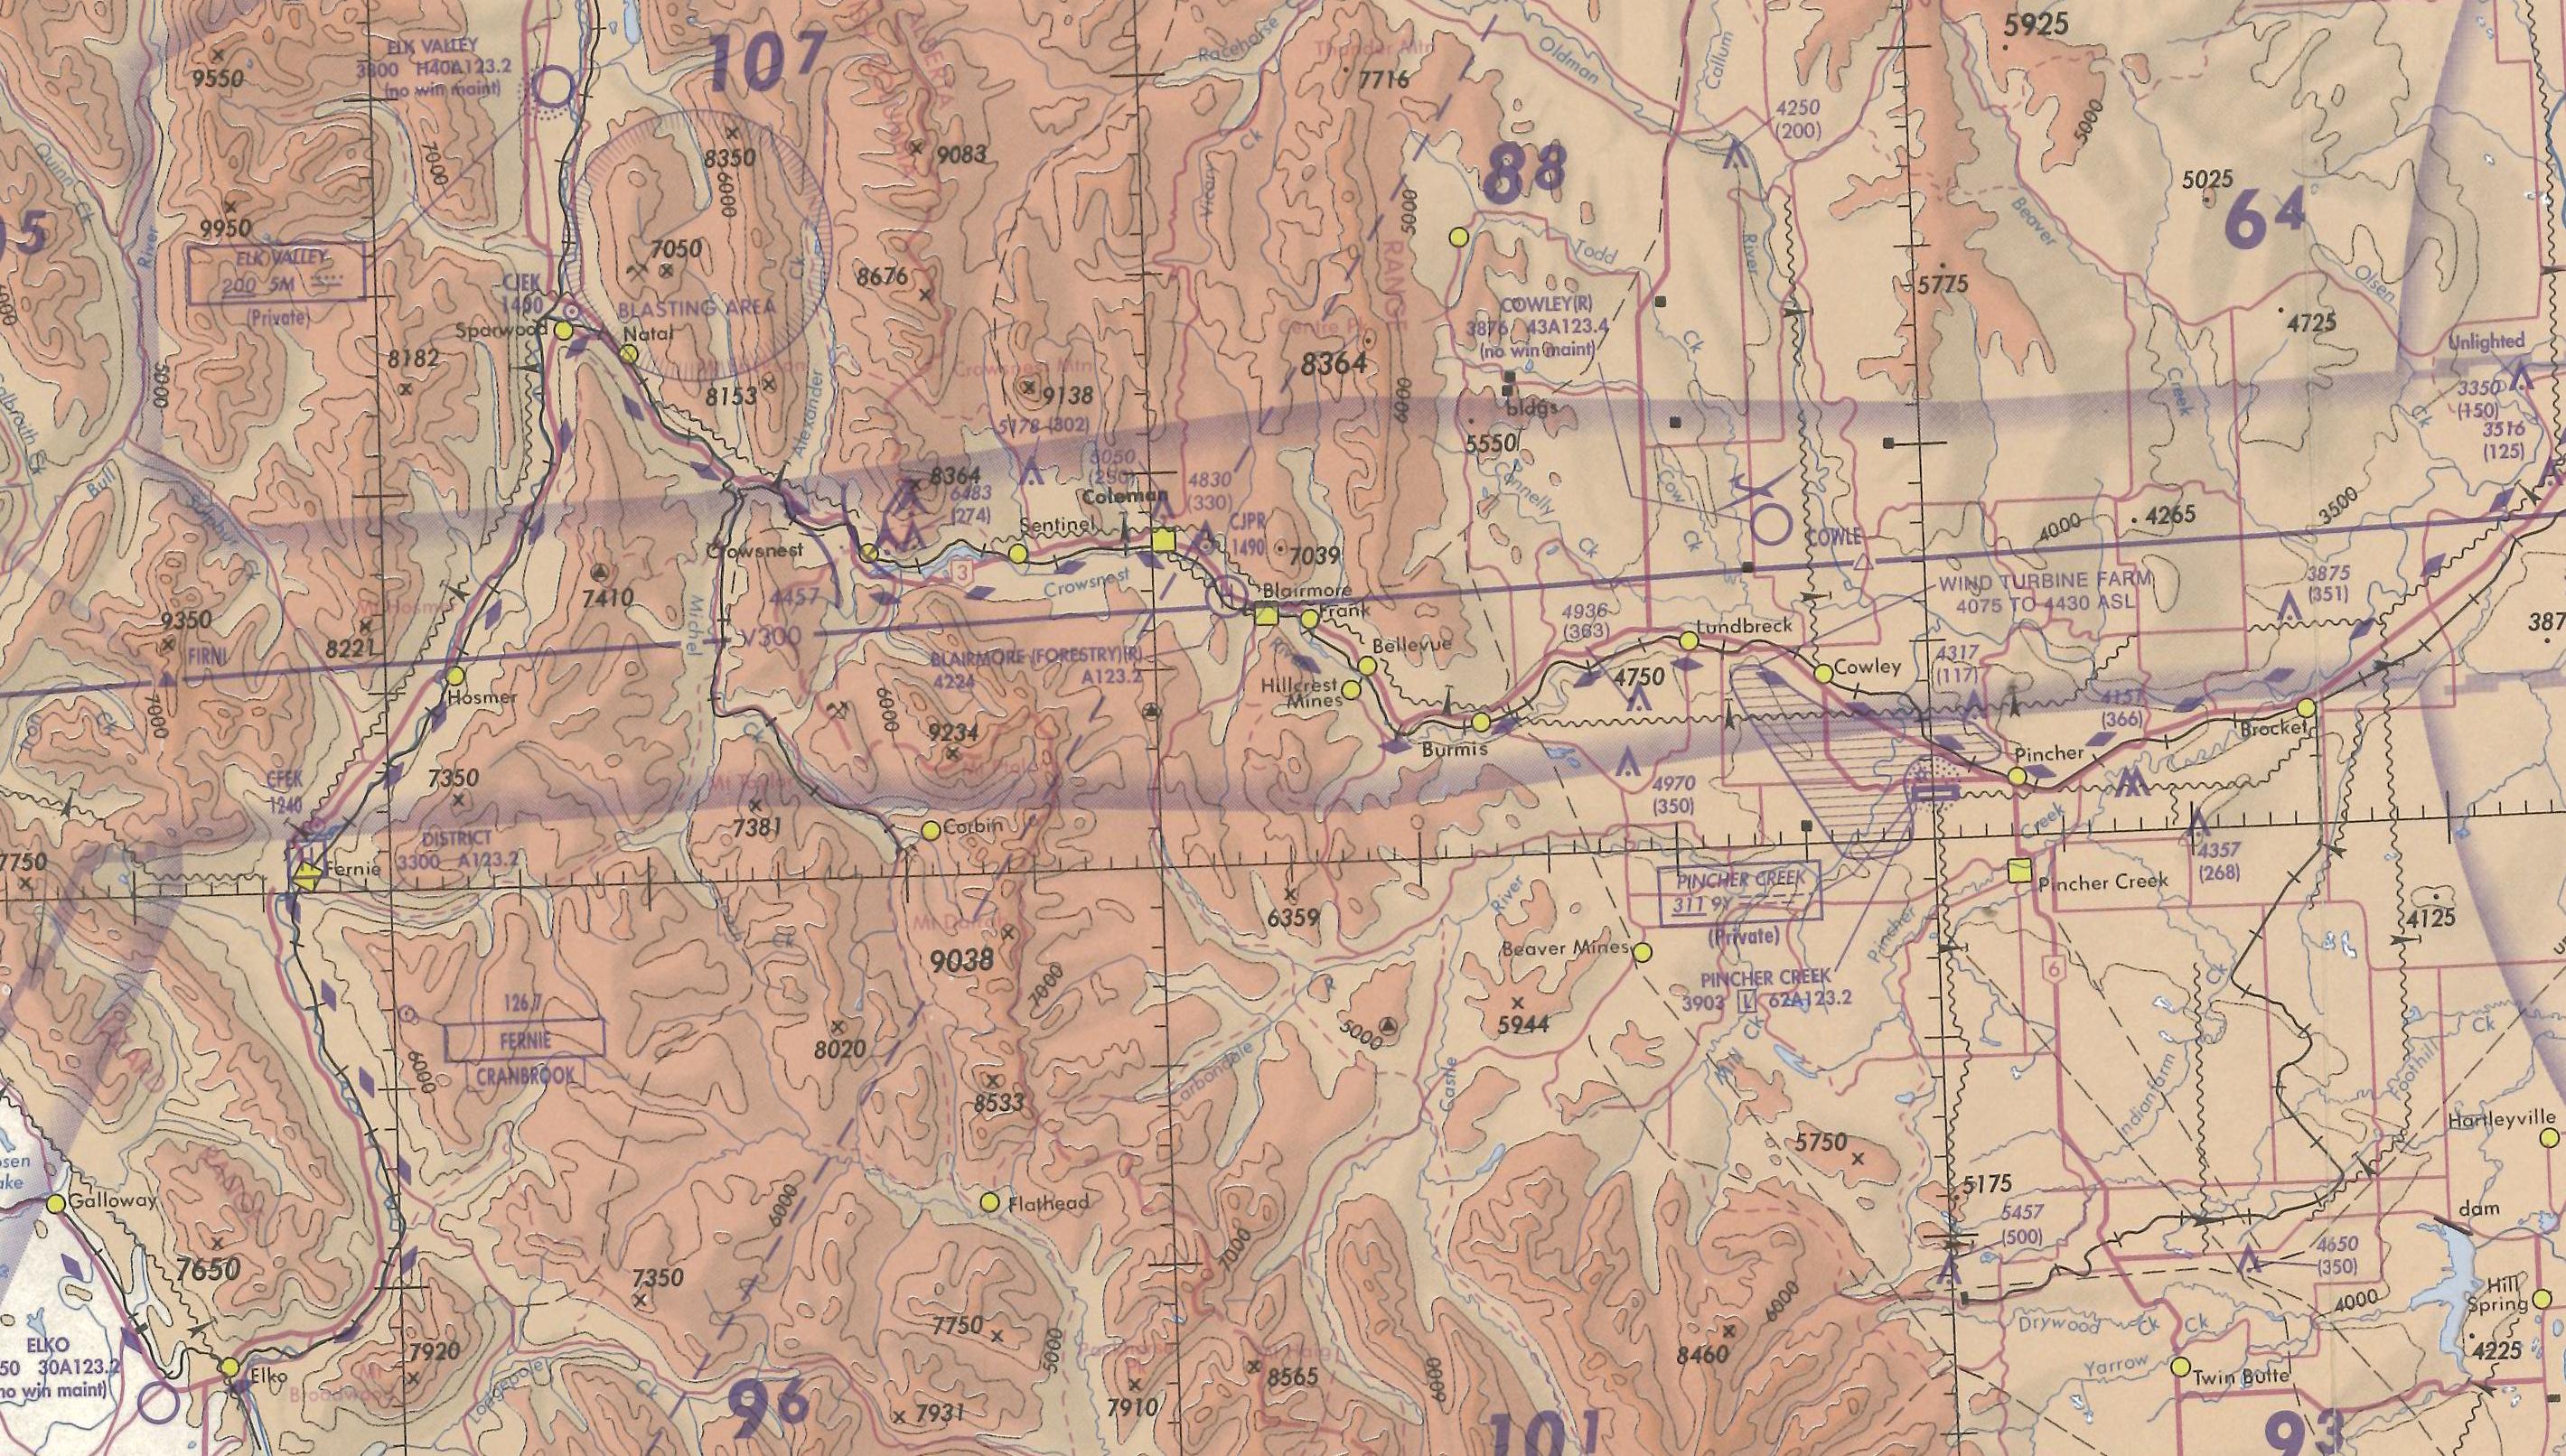 Crowsnest Pass, Langley Flying School's Map Room